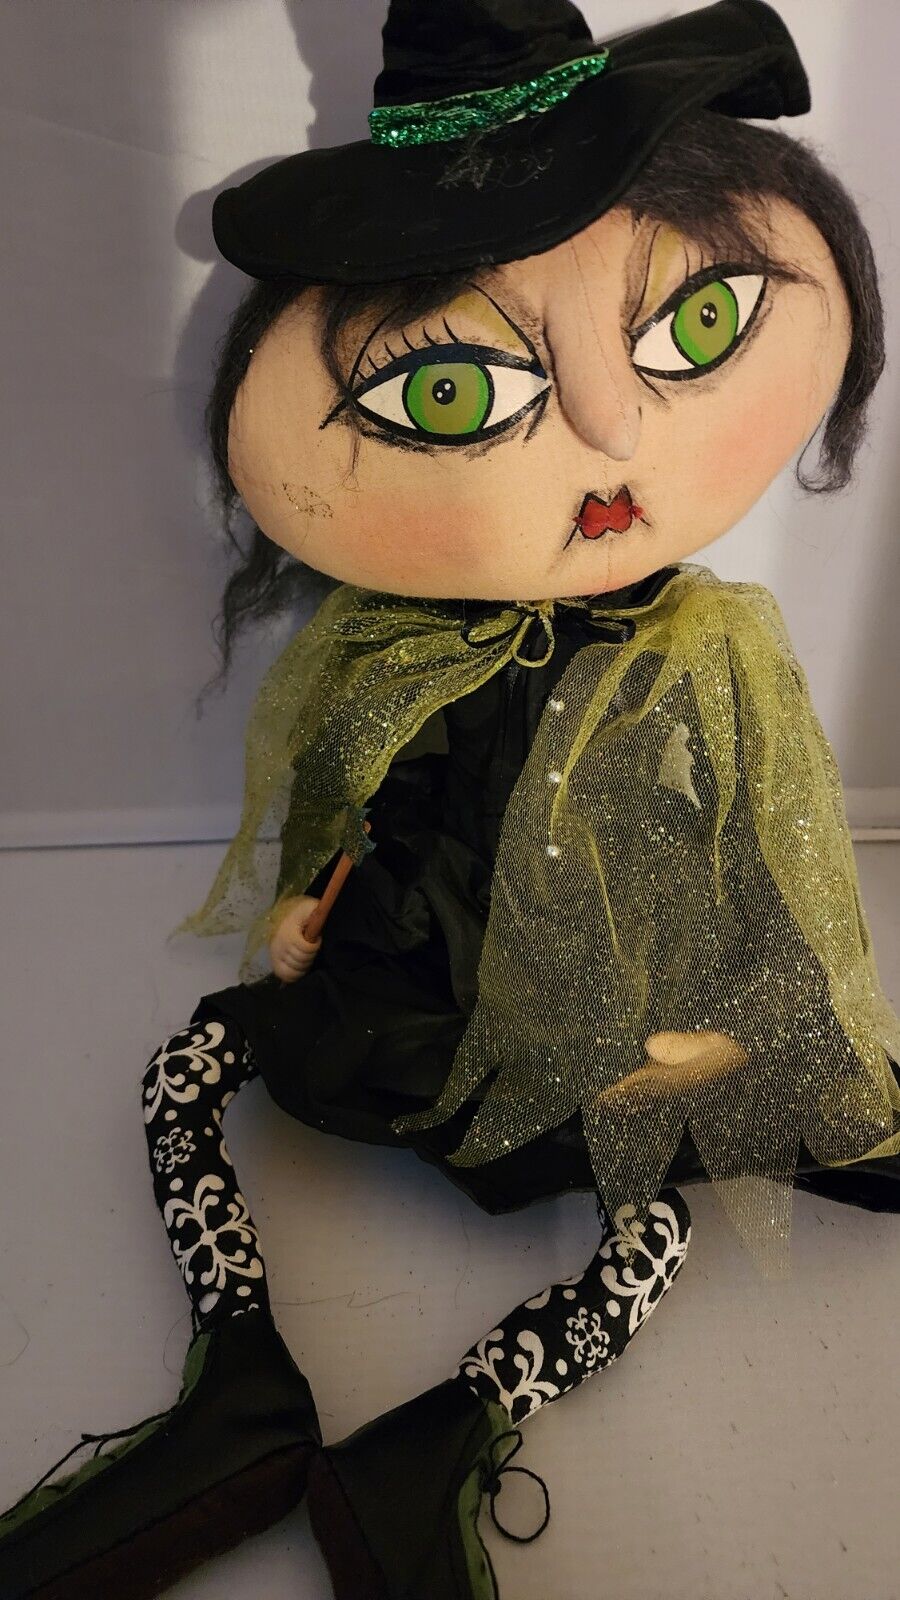 Joe Spencer-Gathered Traditions Holloween Witch Doll